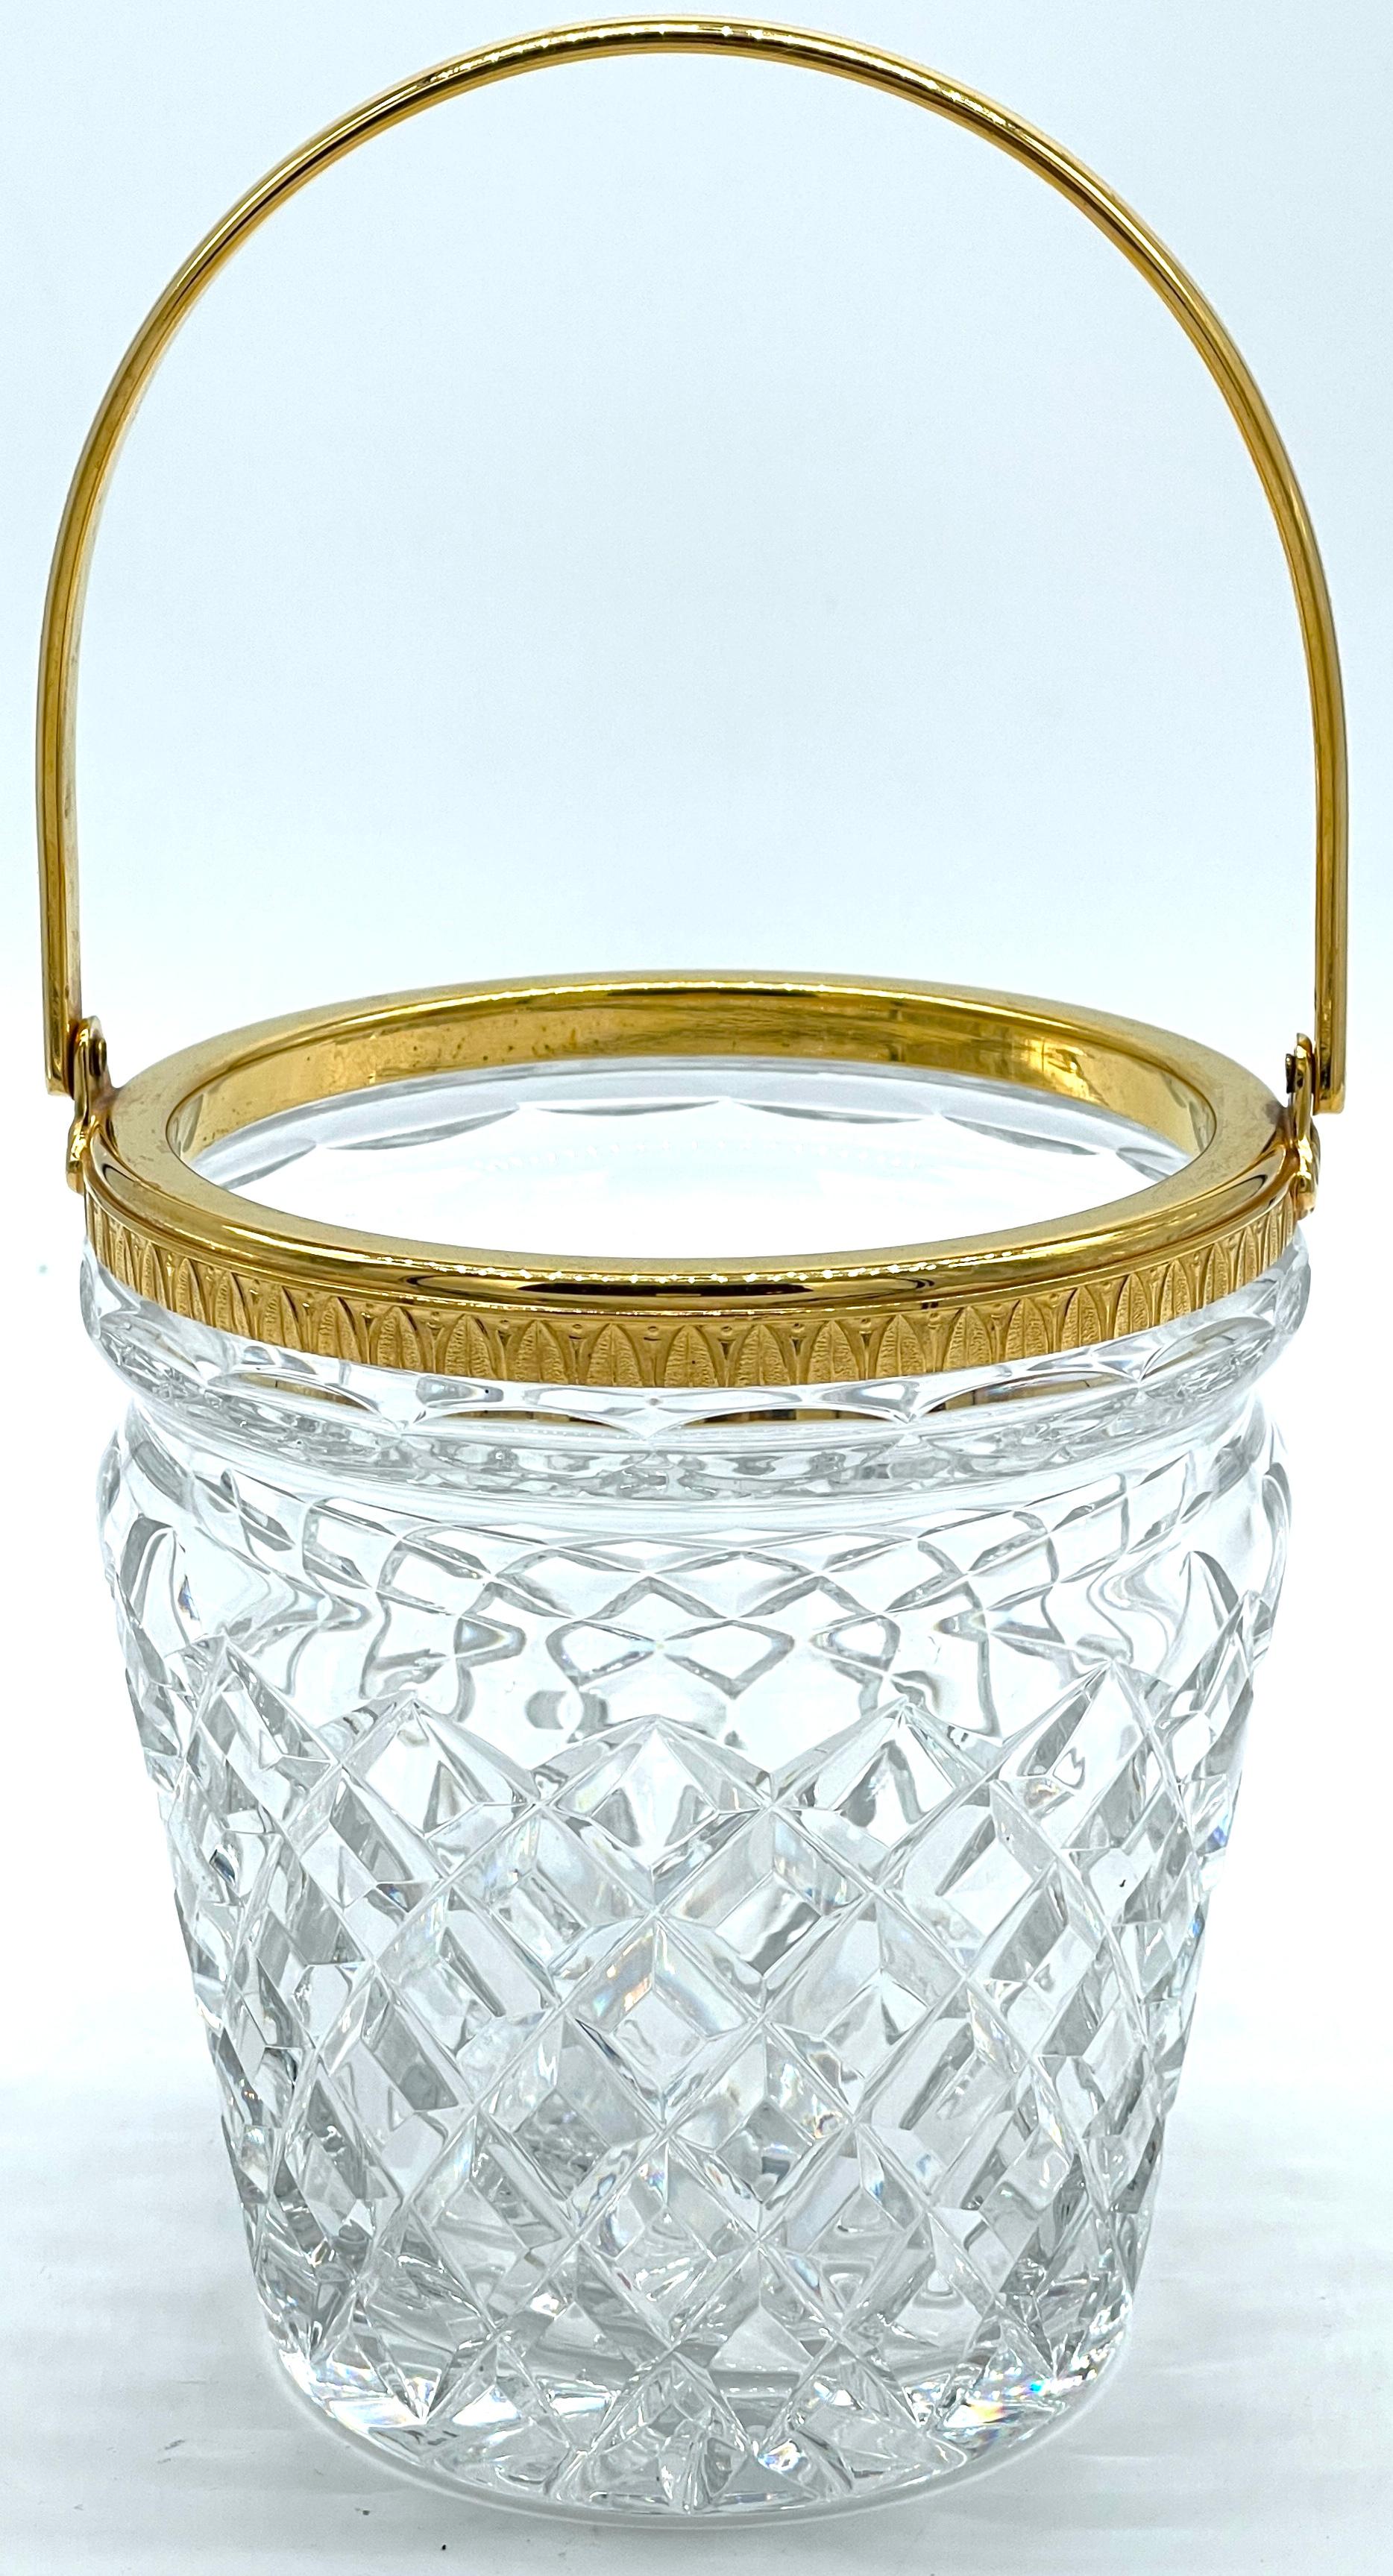  Christofle Neocalssical Cut Crystal Gold Washed Swing -Handled Ice Bucket For Sale 1